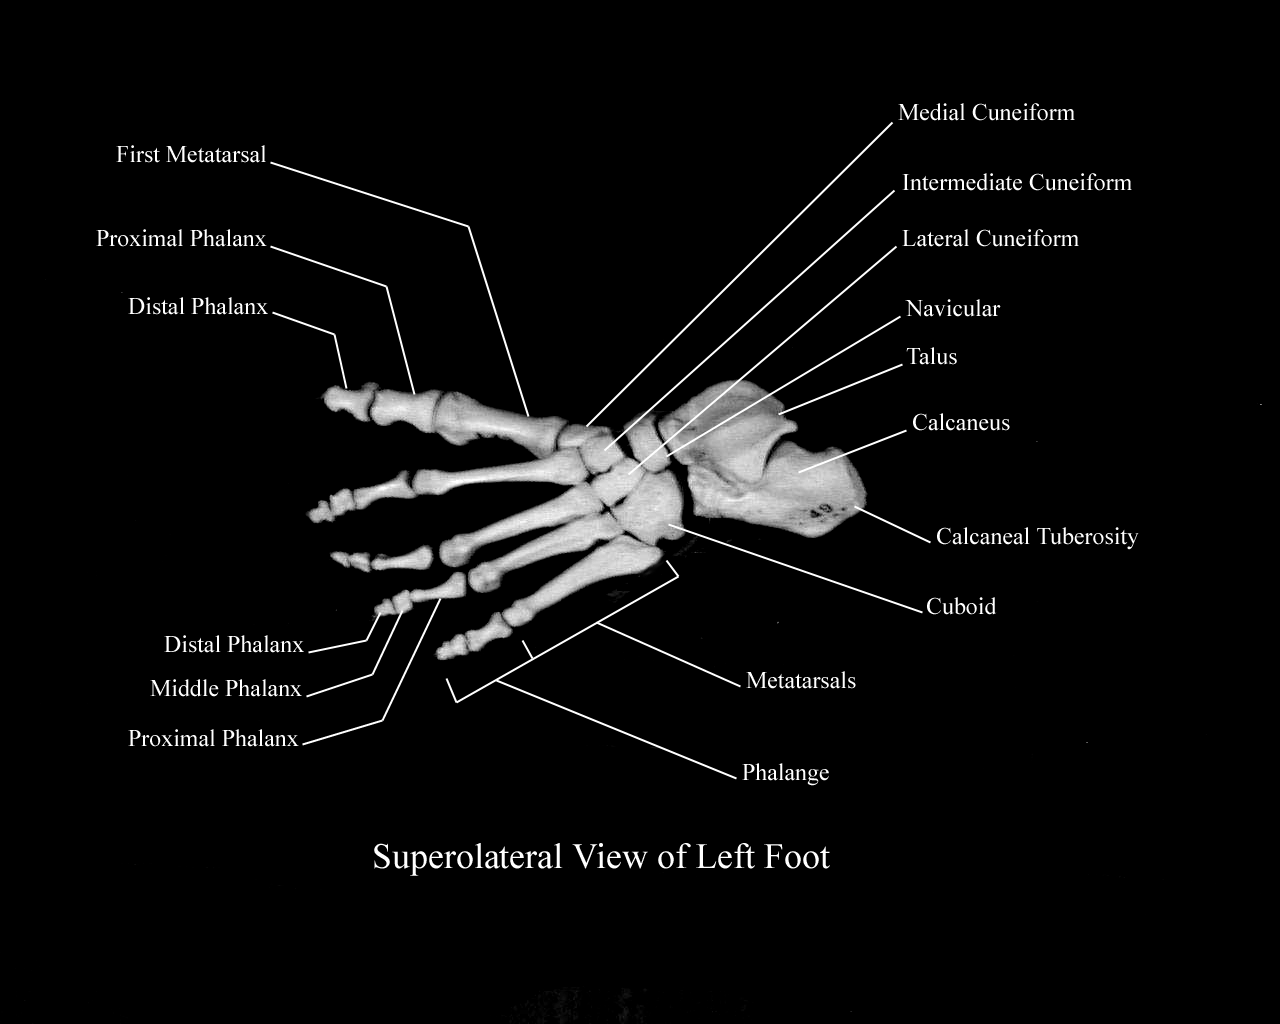 a labeled picture of the bones of the foot from a superolateral view